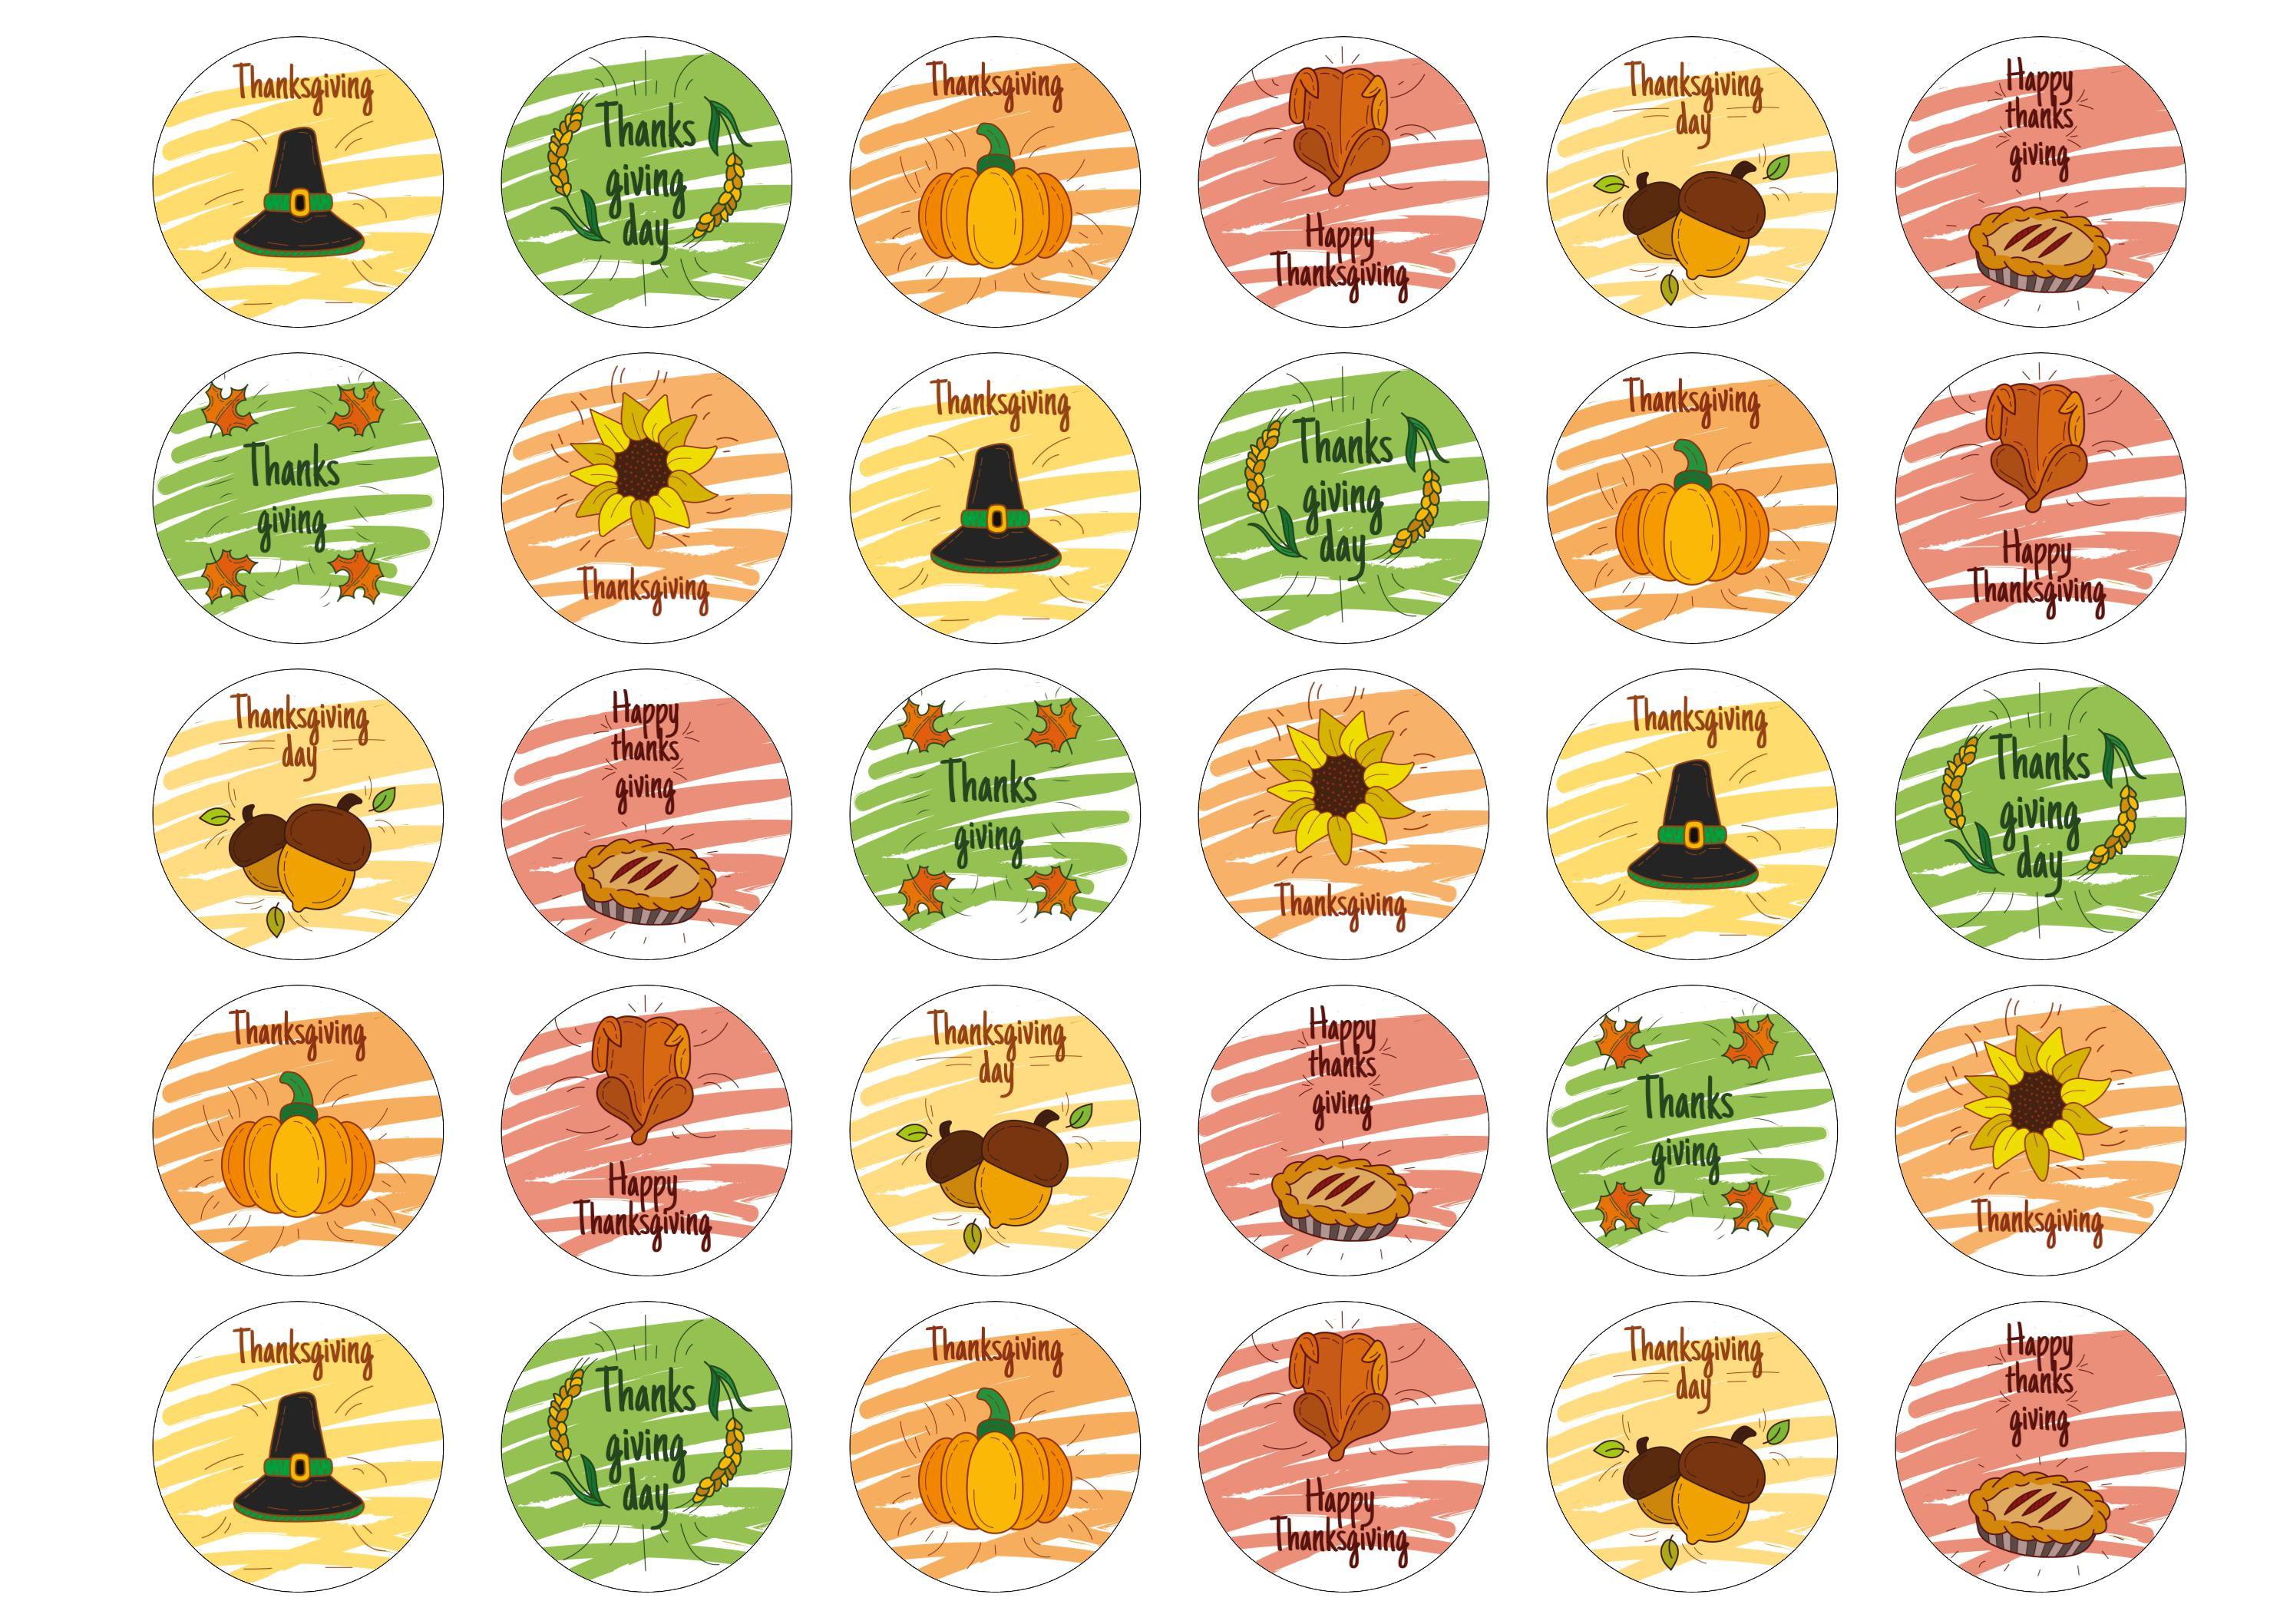 30 edible Thanksgiving cupcake toppers with images and messages to celebrate